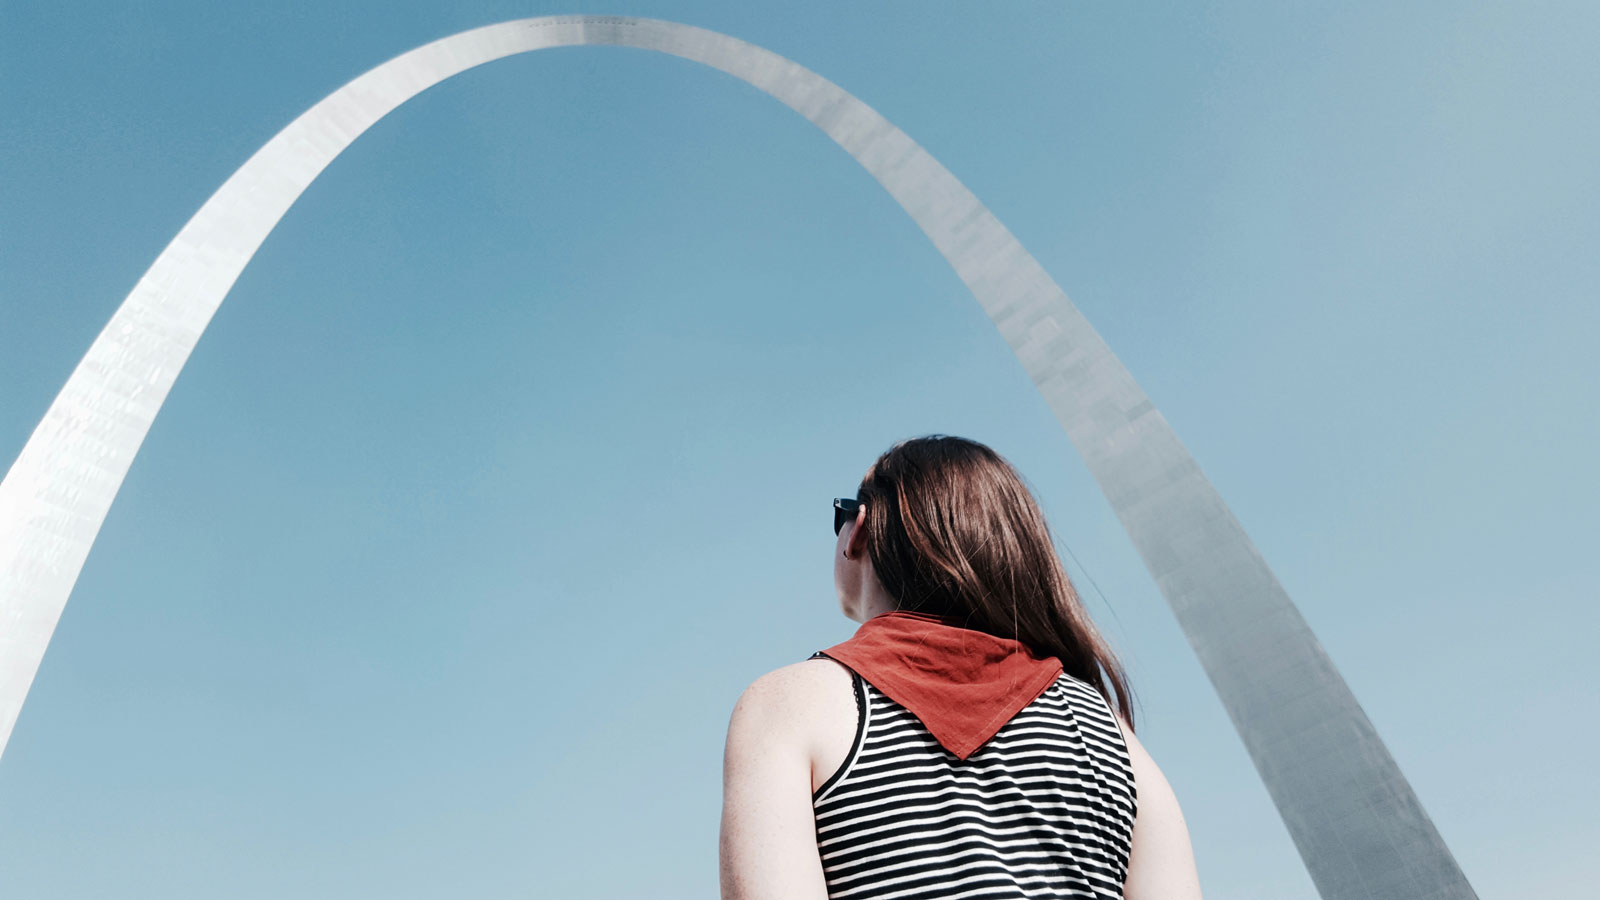 Alyssa looks up at the St. Louis Arch